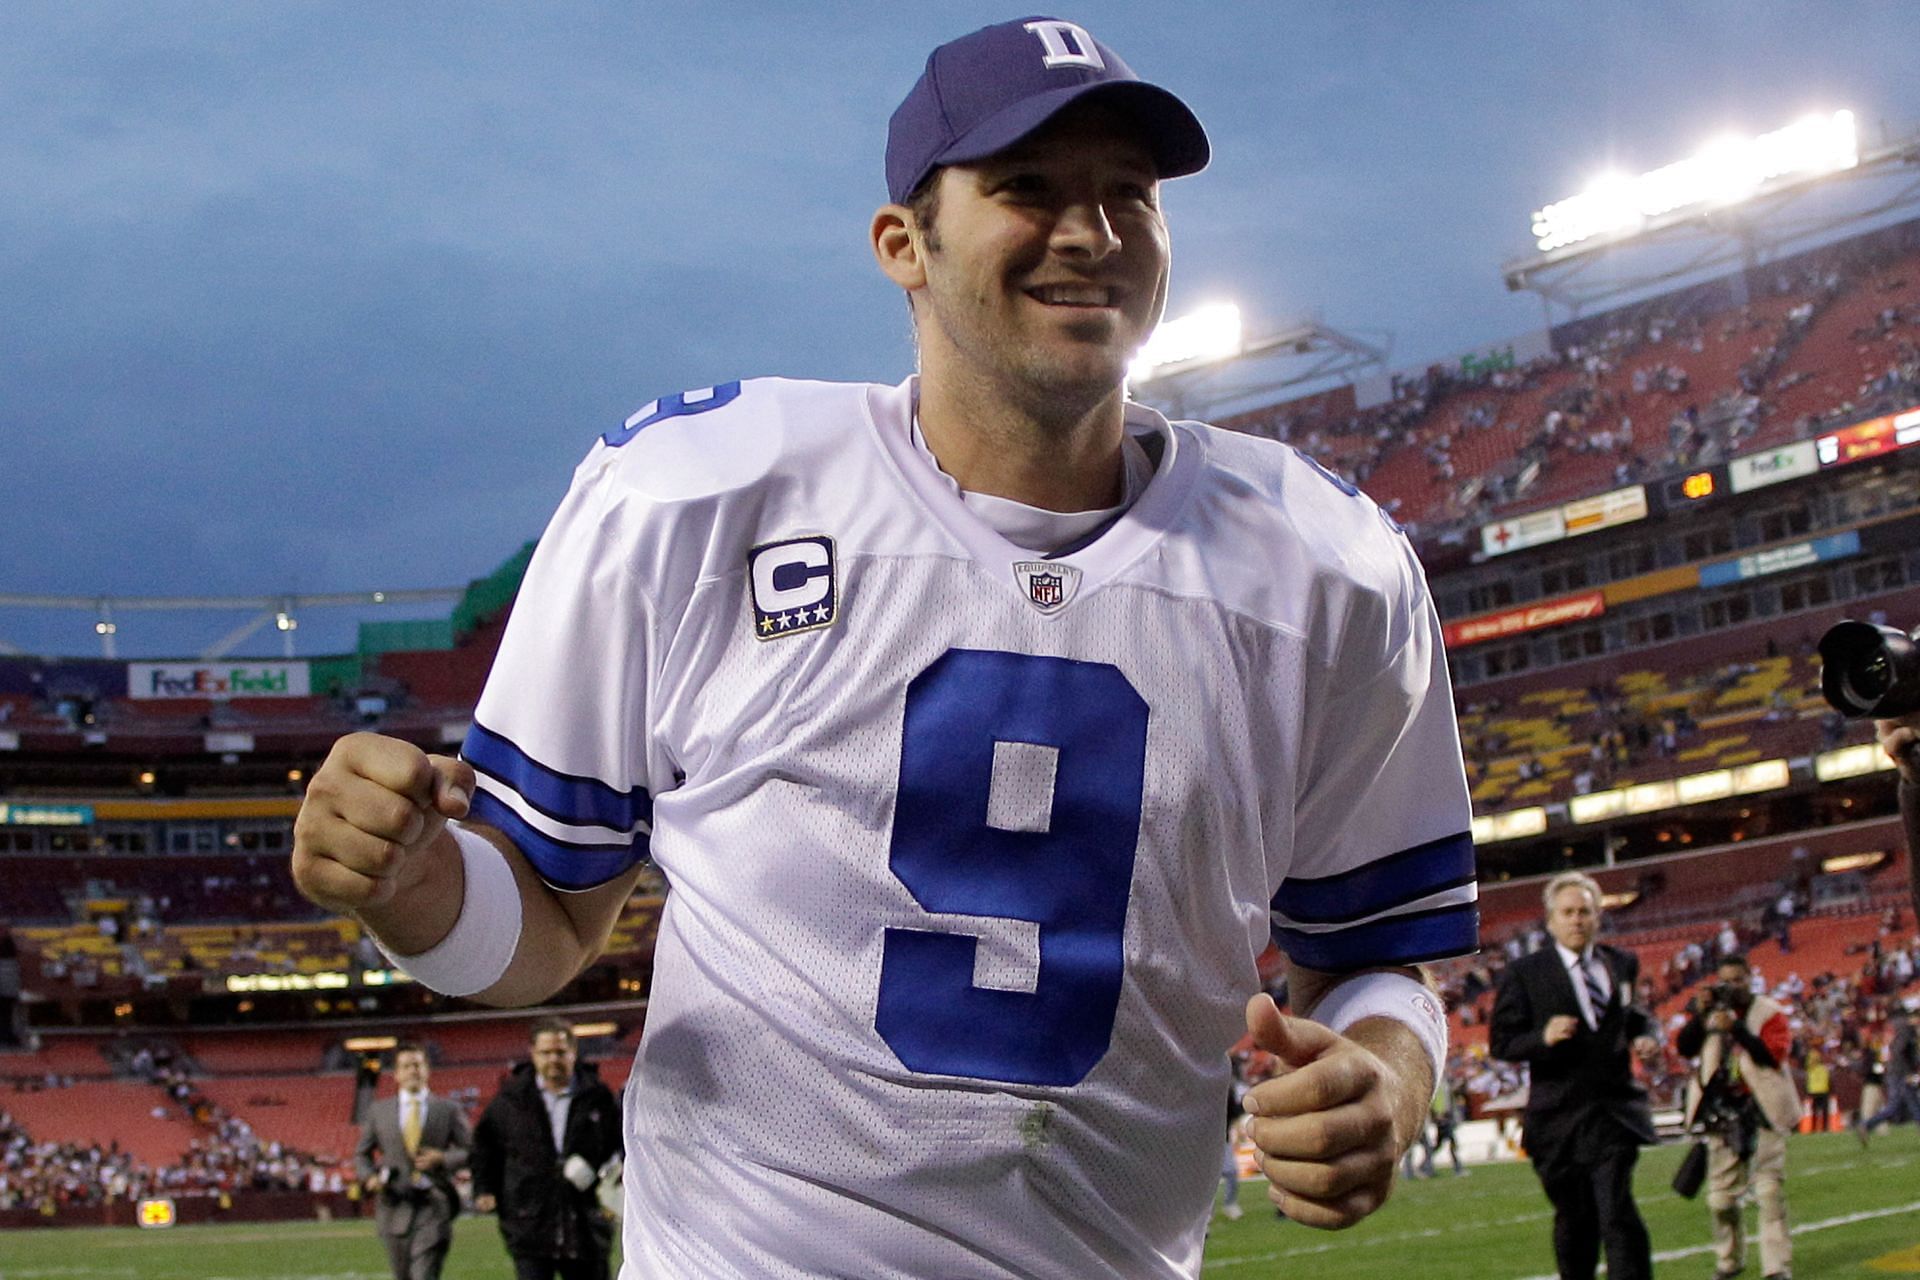 Injuries and a lack of quality around him kept Romo from a championship run in Dallas